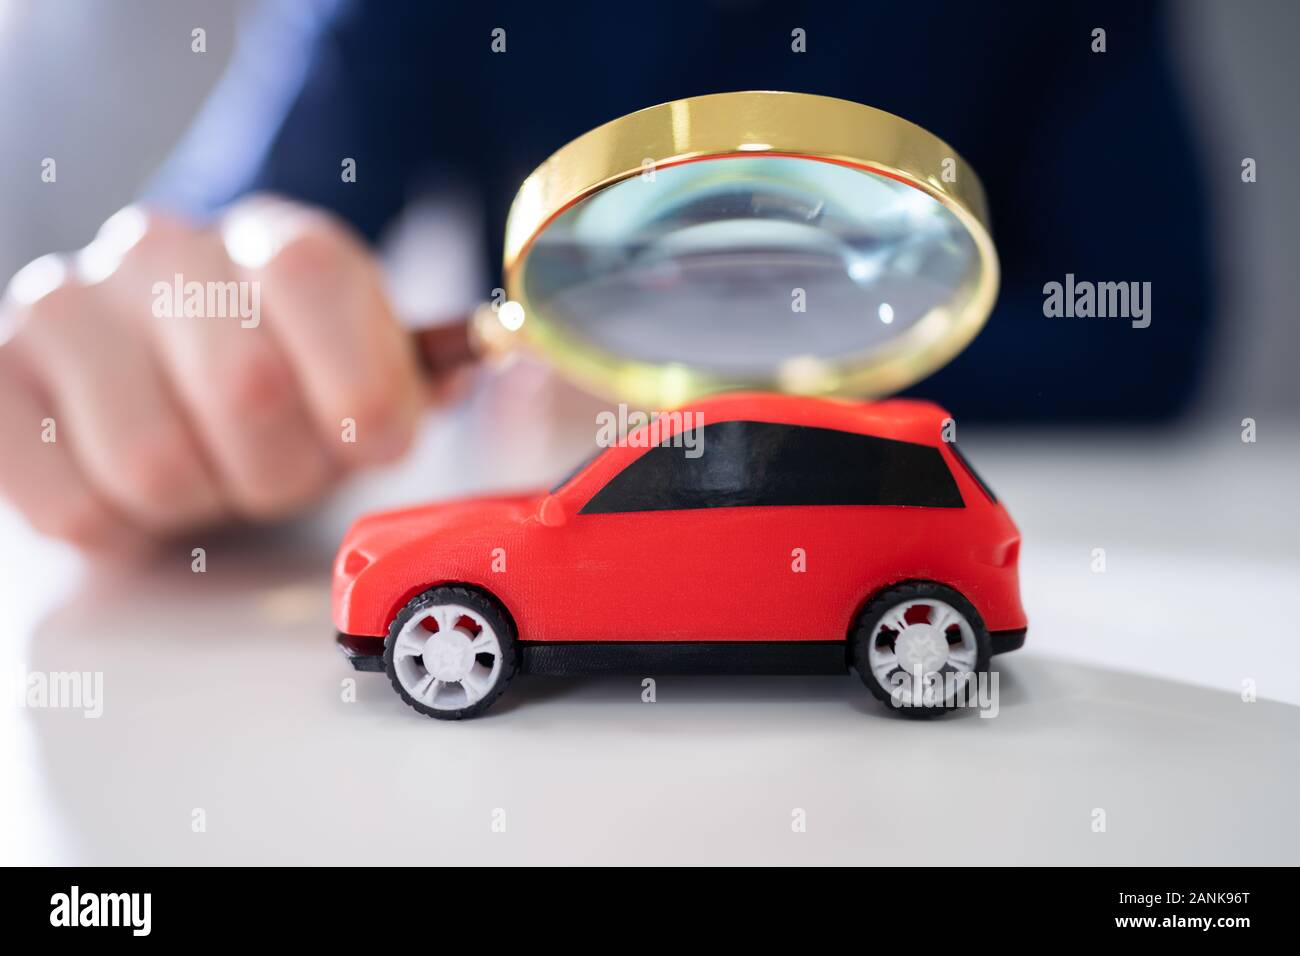 Businessman's Hand Holding Magnifying Glass Over Small Red Car Stock Photo